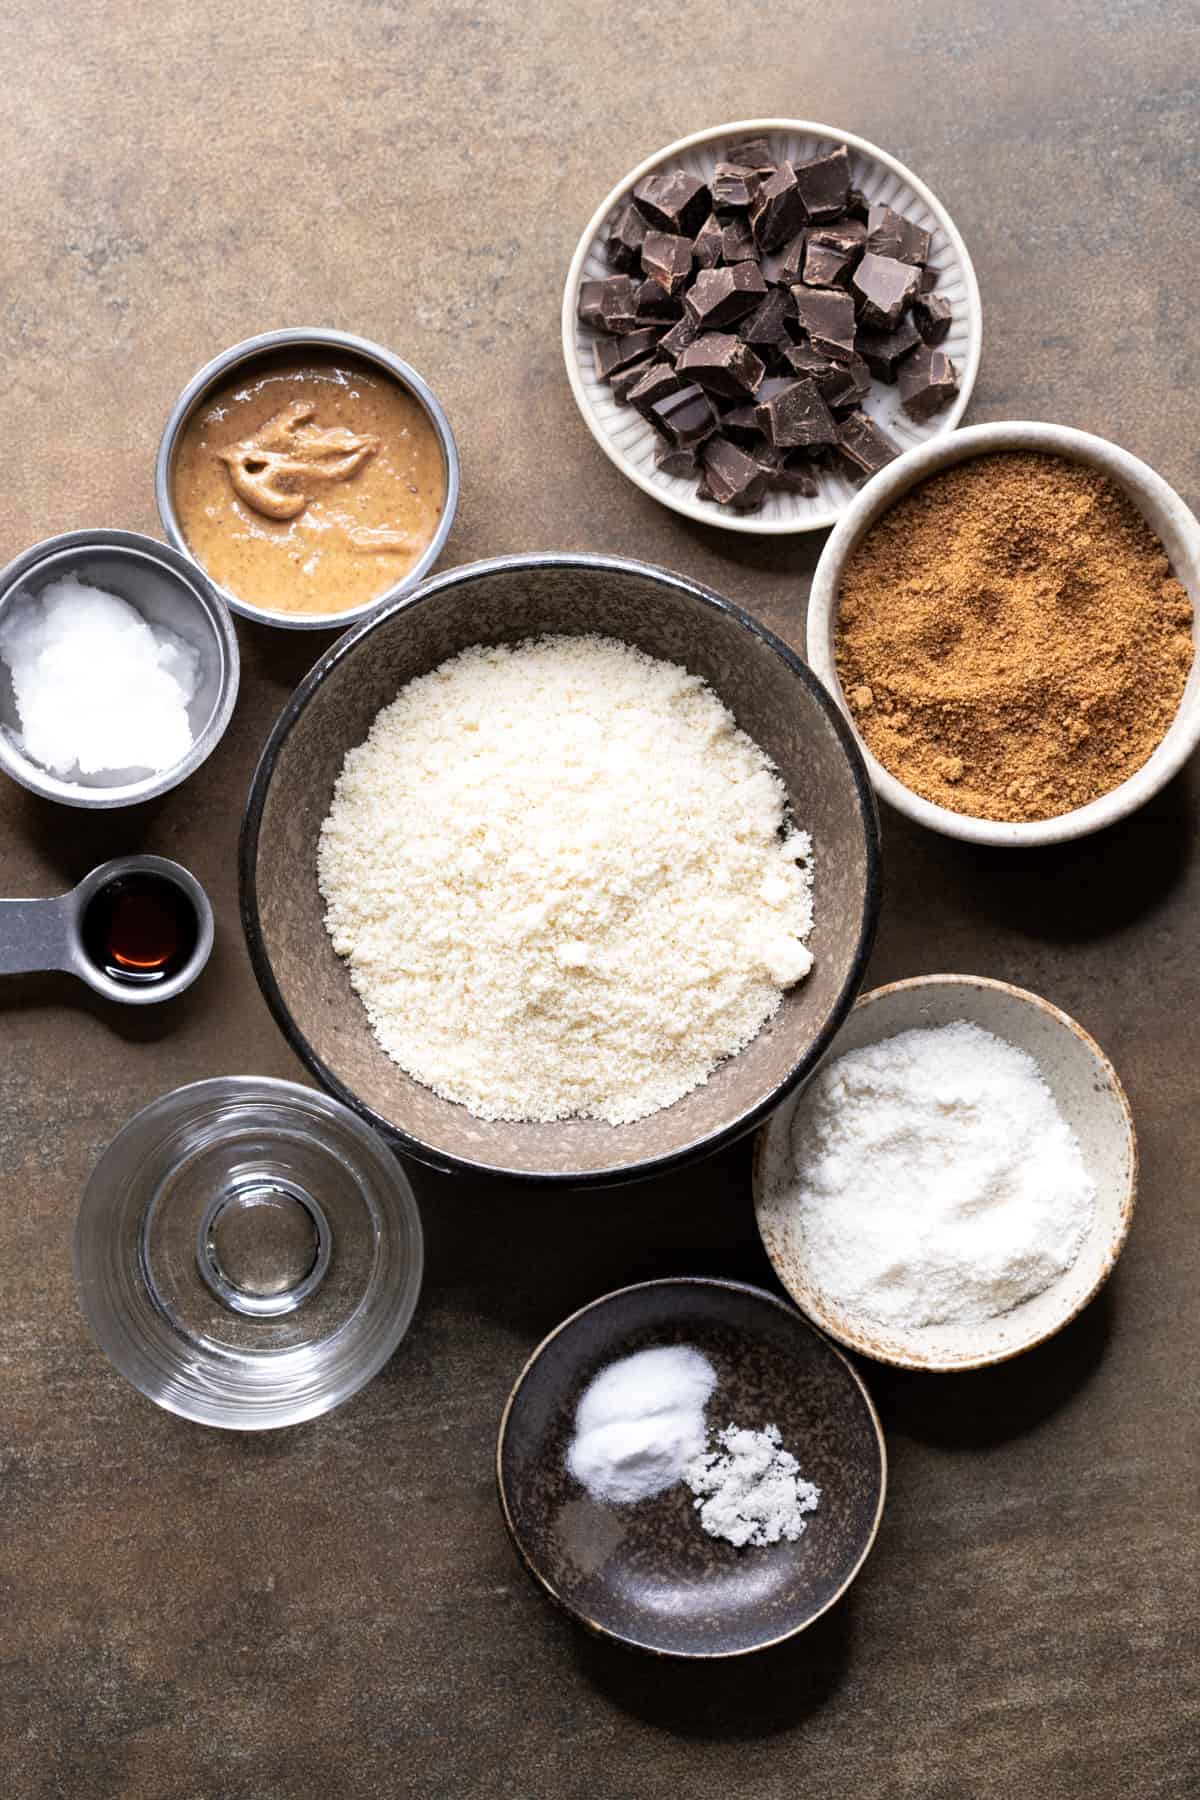 Ingredients for paleo chocolate chip cookies